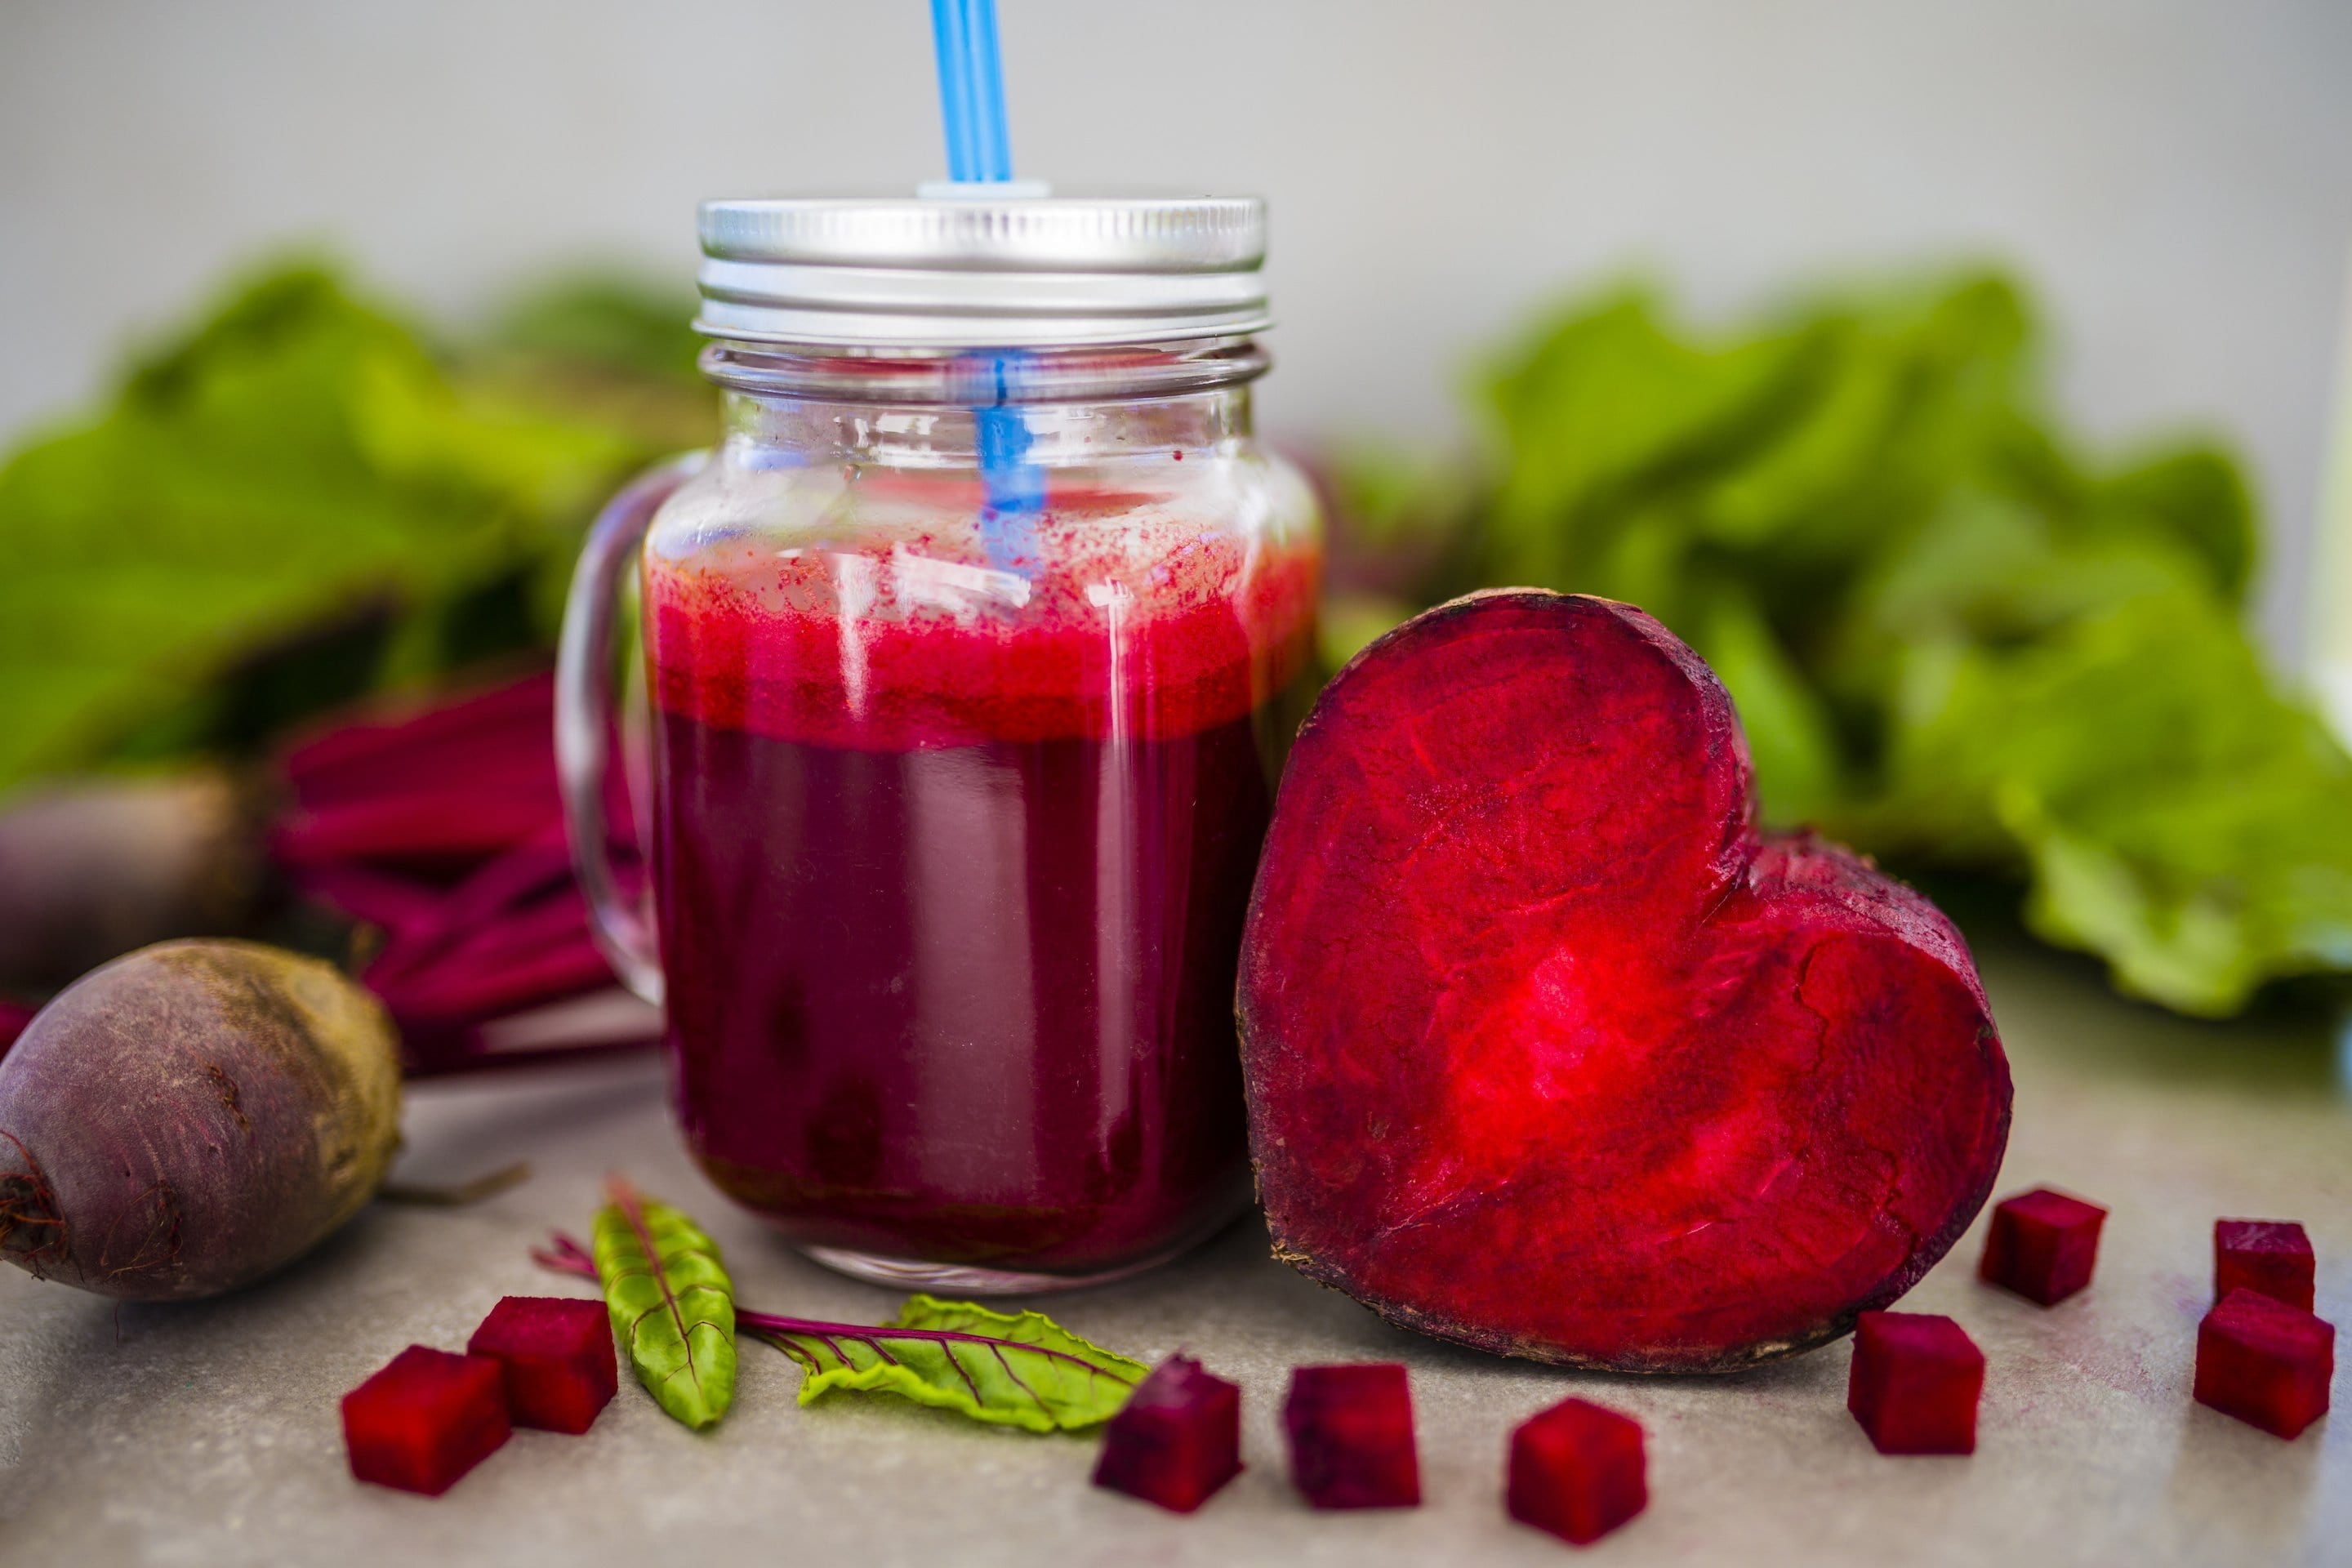 Beet Root Juice Improves Sports Performance